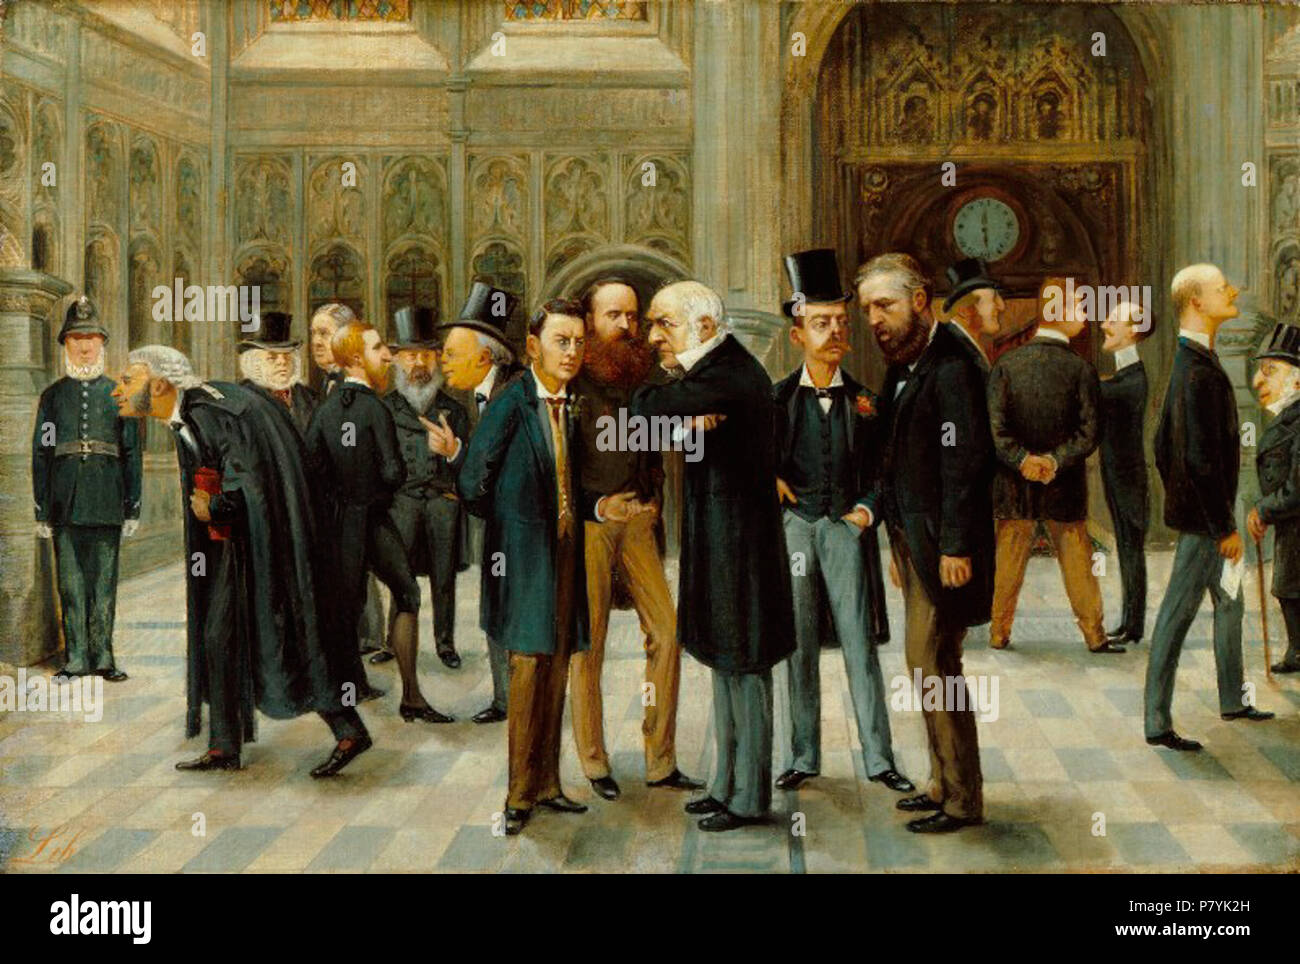 English: The lobby of the House of Commons. Oil on canvas, published in Vanity Fair Christmas Supplement 1886 . circa 1886 300 The-Lobby-of-the-House-of-Commons-1886 Stock Photo